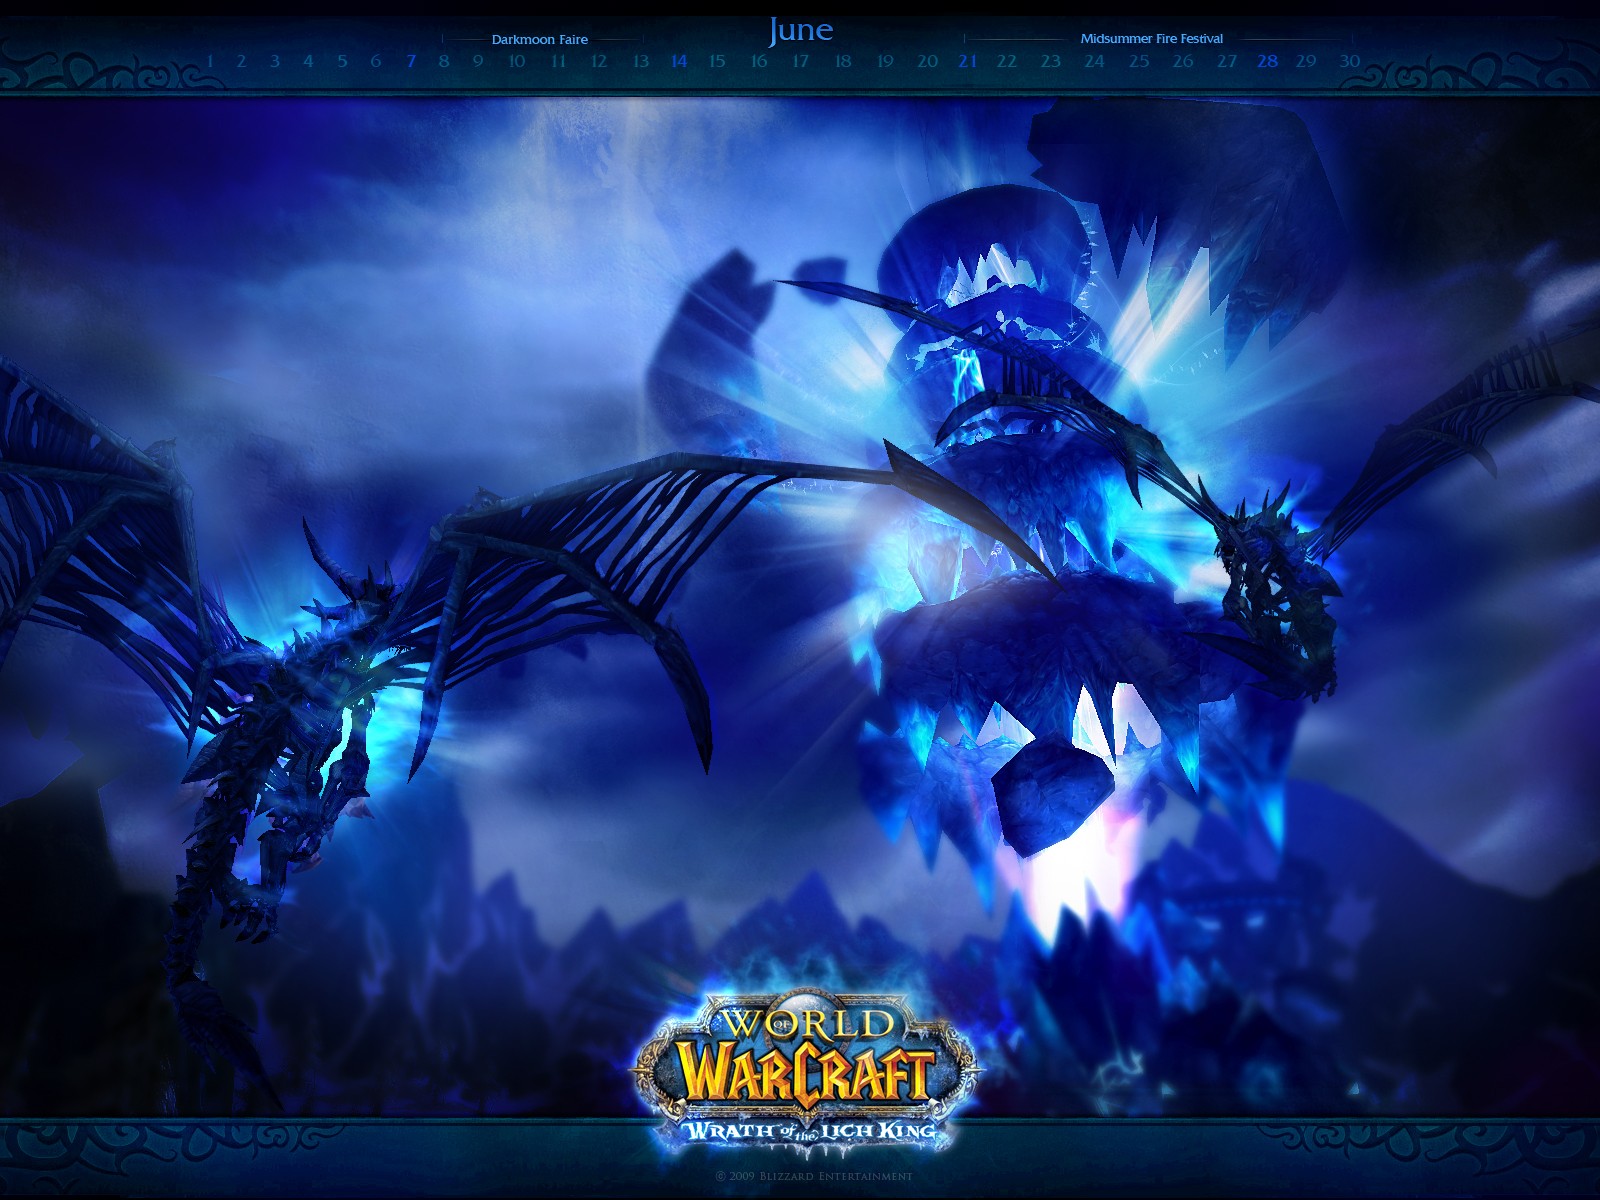 General 1600x1200 World of Warcraft World of Warcraft: Wrath of the Lich King dragon video games PC gaming 2009 (Year)